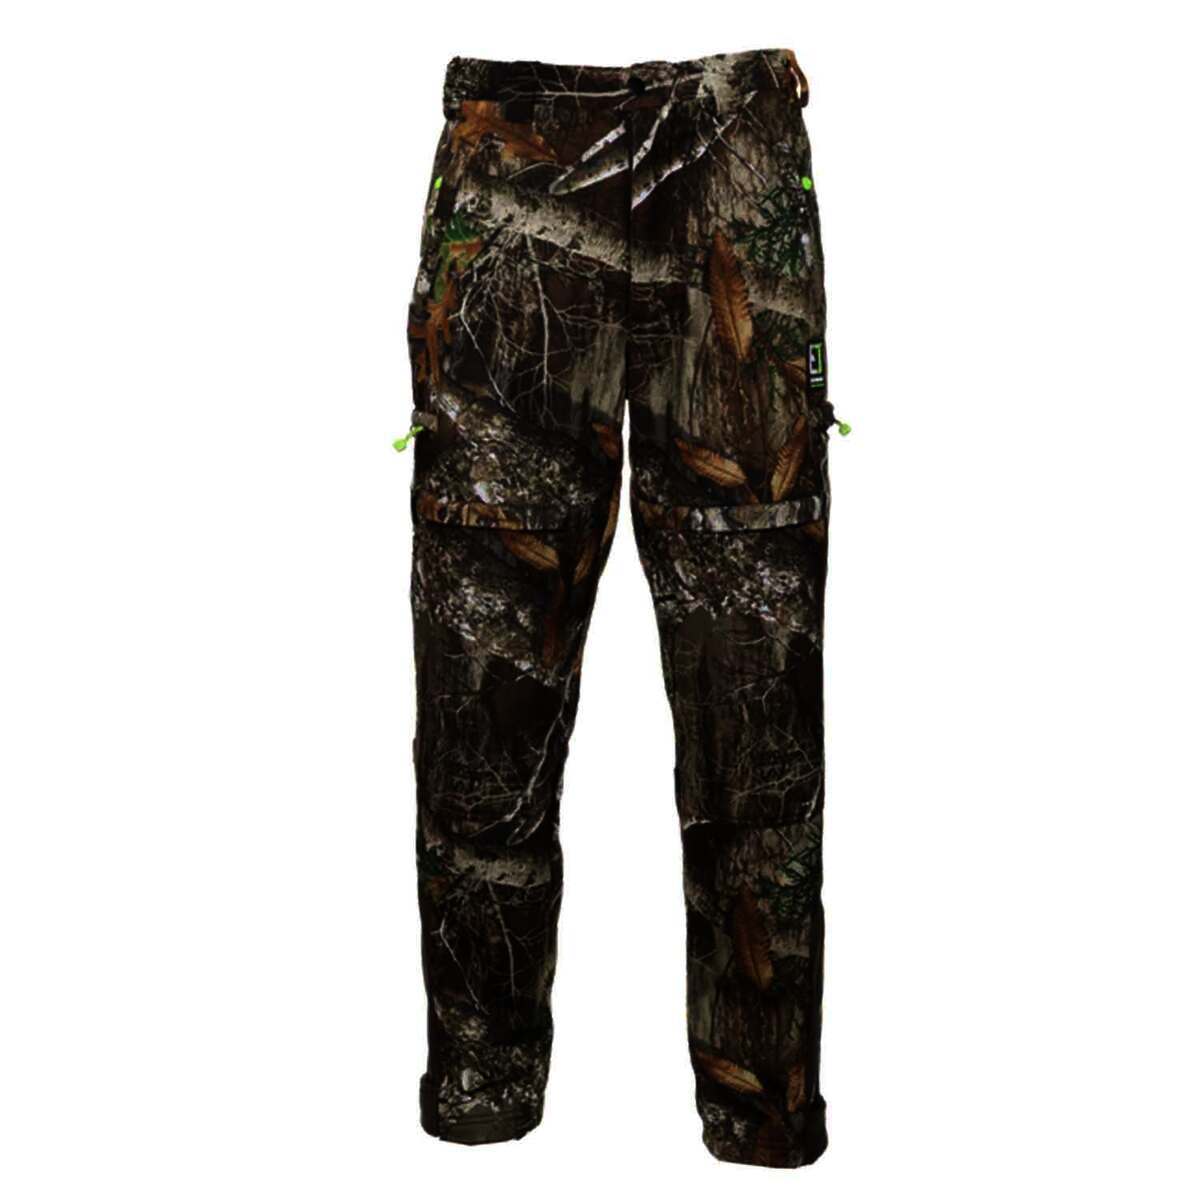  Mossy Oak Camo Lightweight Hunting Pants for Men Camouflage  Clothing, Small, Bottomland : Clothing, Shoes & Jewelry